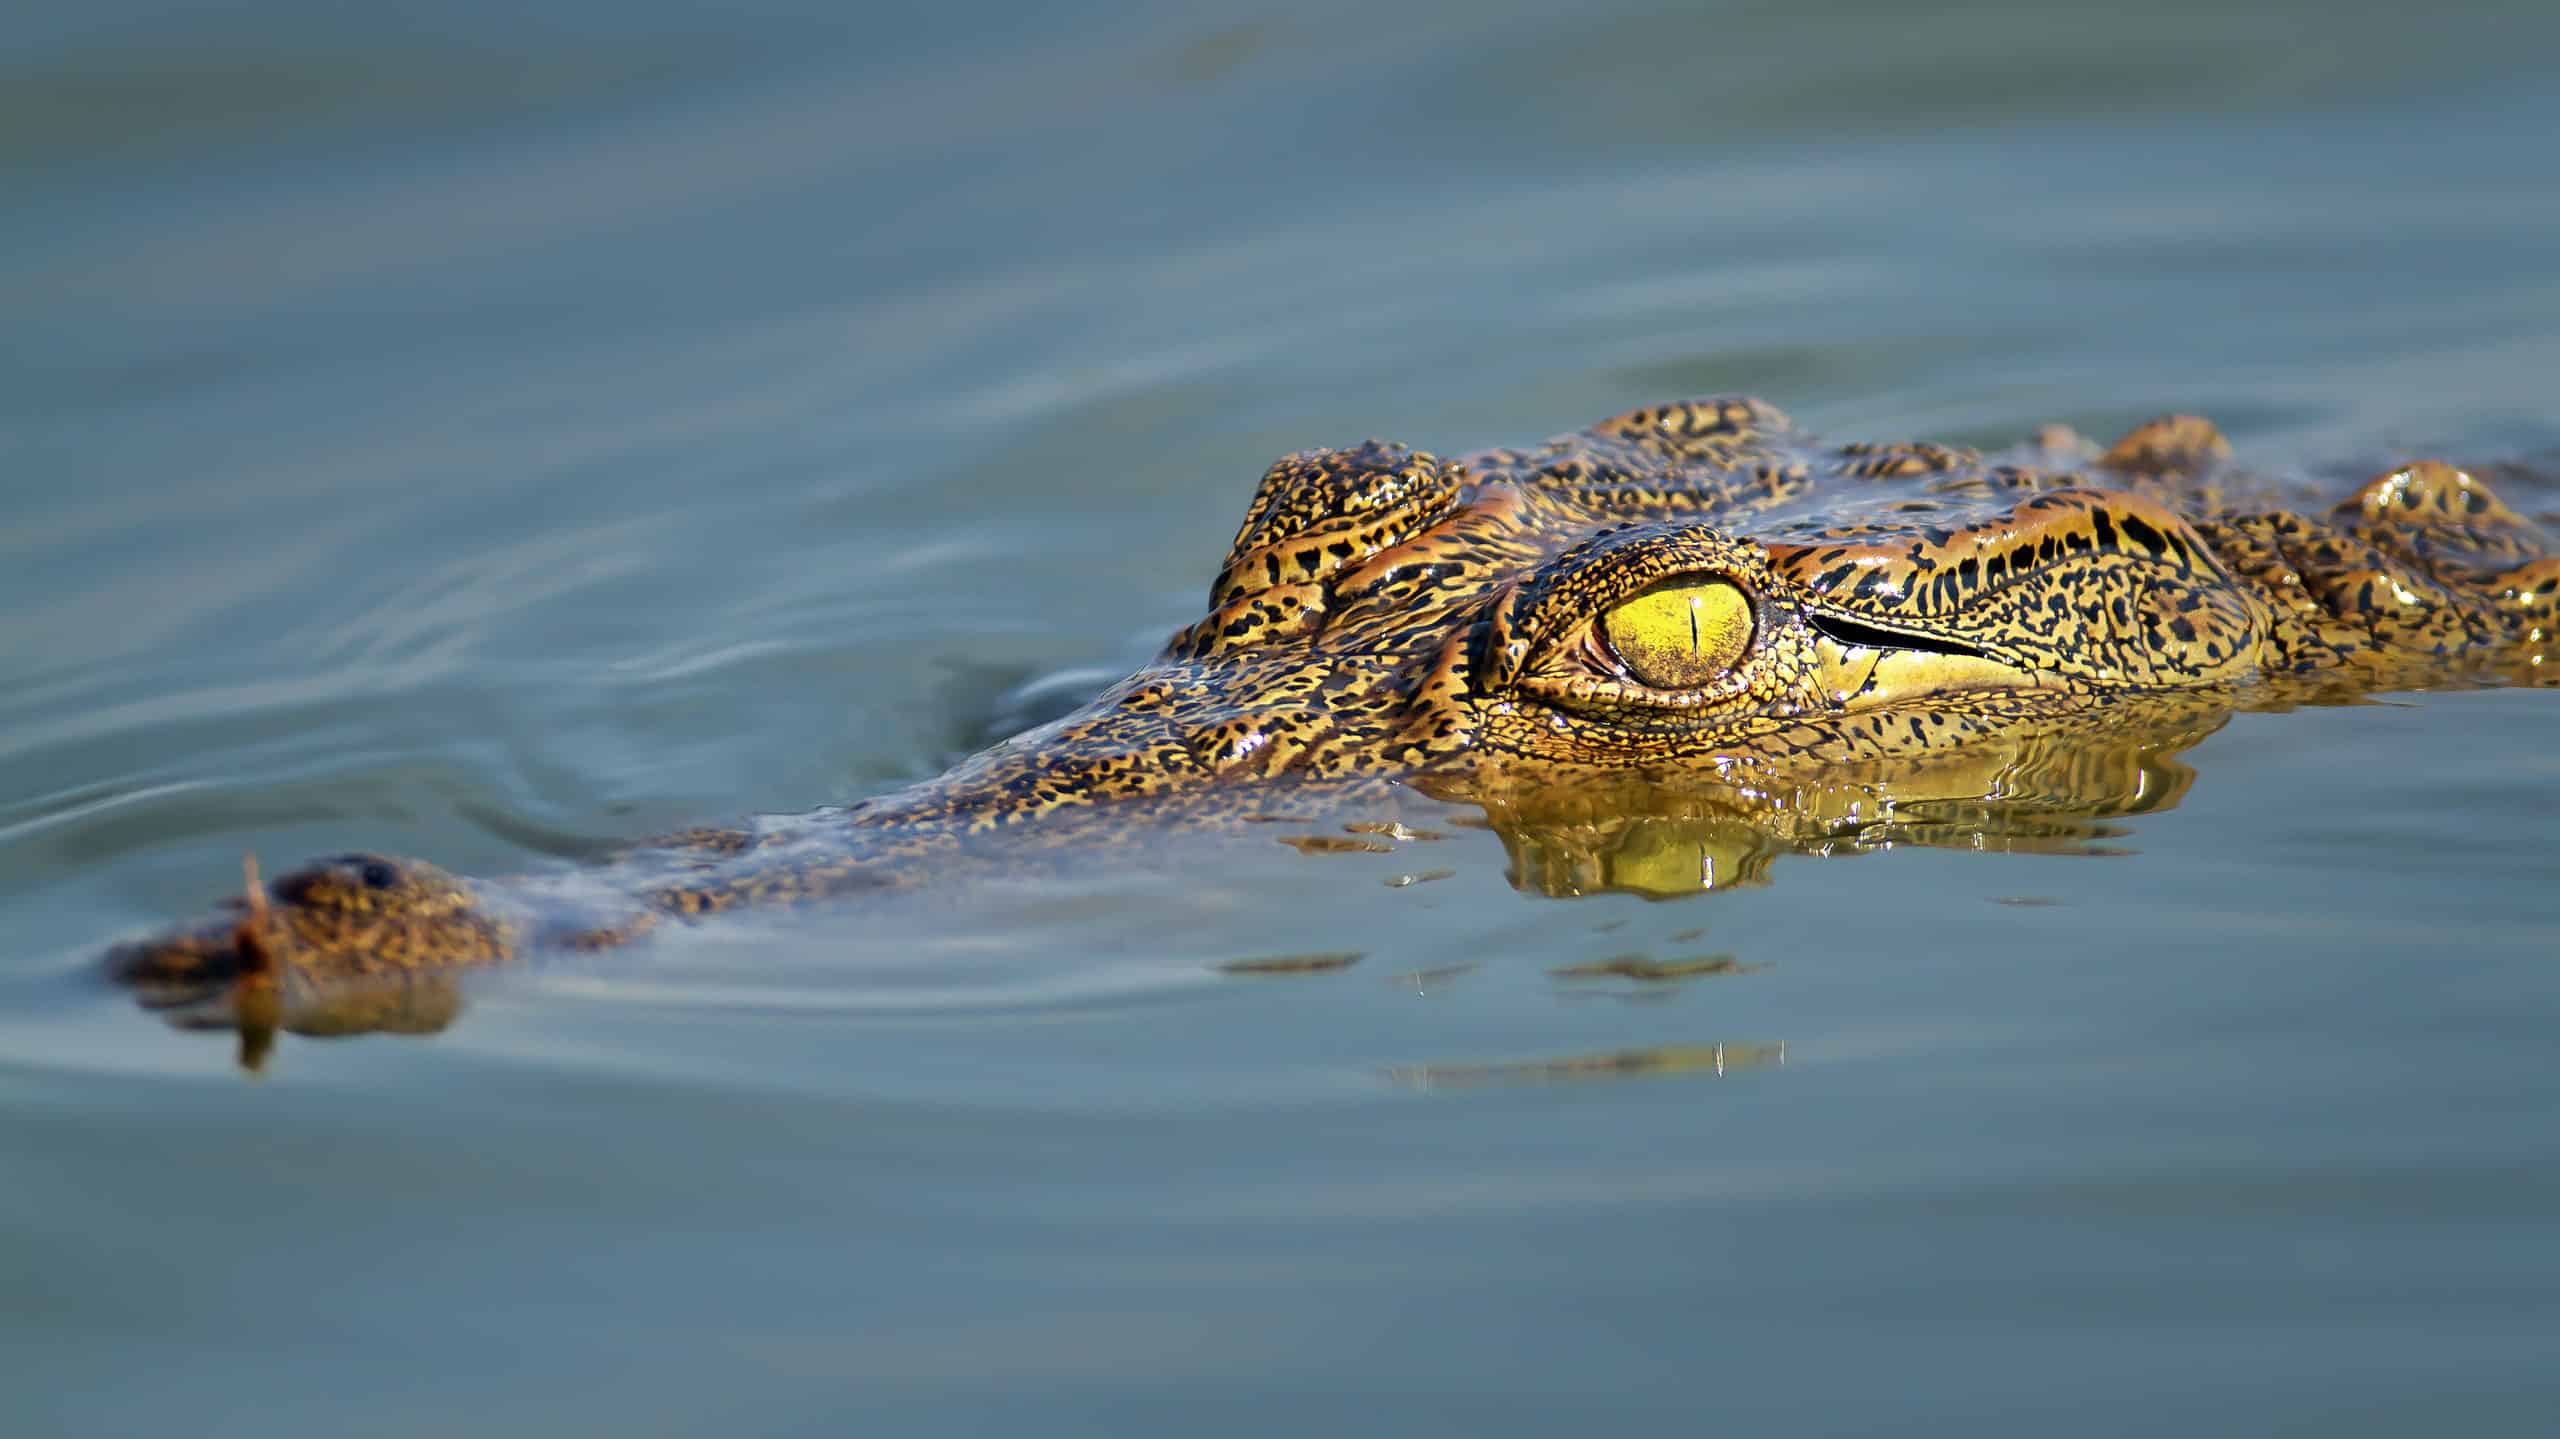 Nile crocodile staying just under the water surface